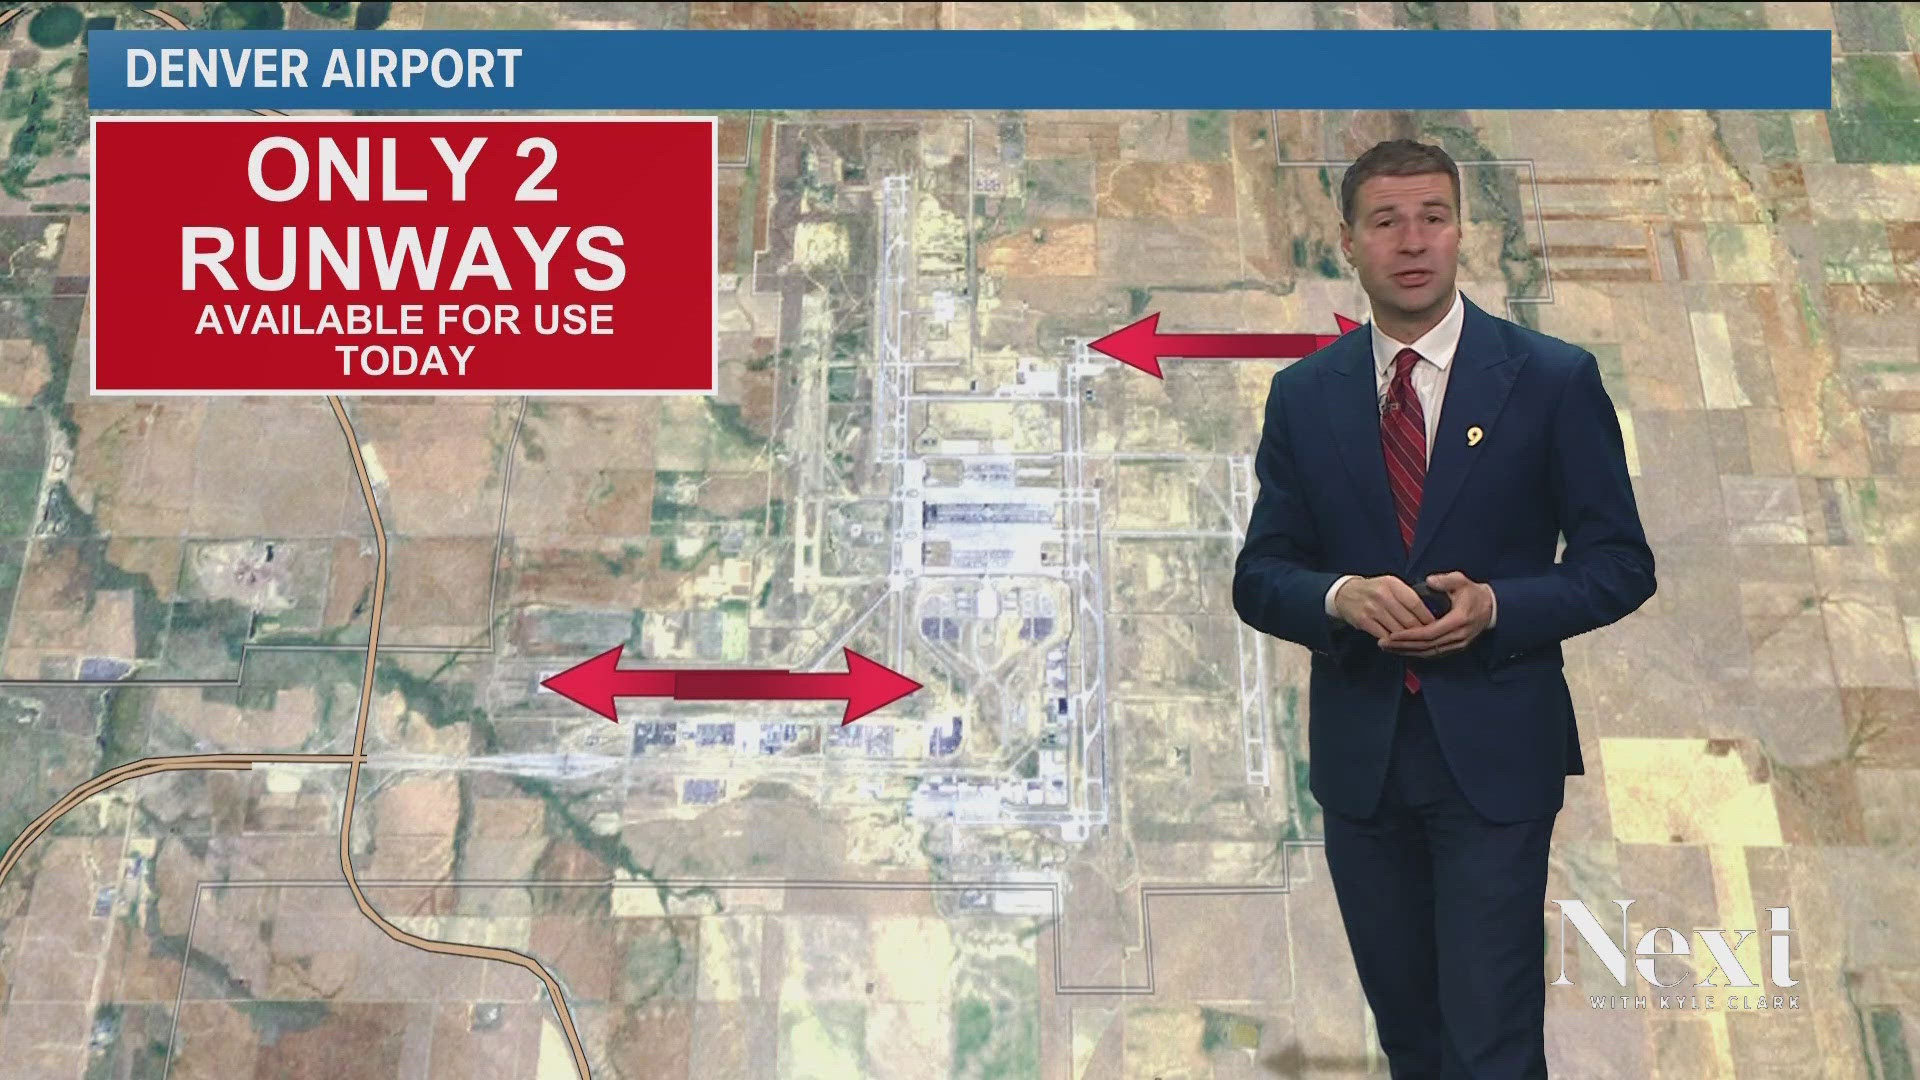 The airport saw more than one thousand delayed flights as winds topped 50 miles per hour there. Chris Bianchi explains how runway direction is the issue.